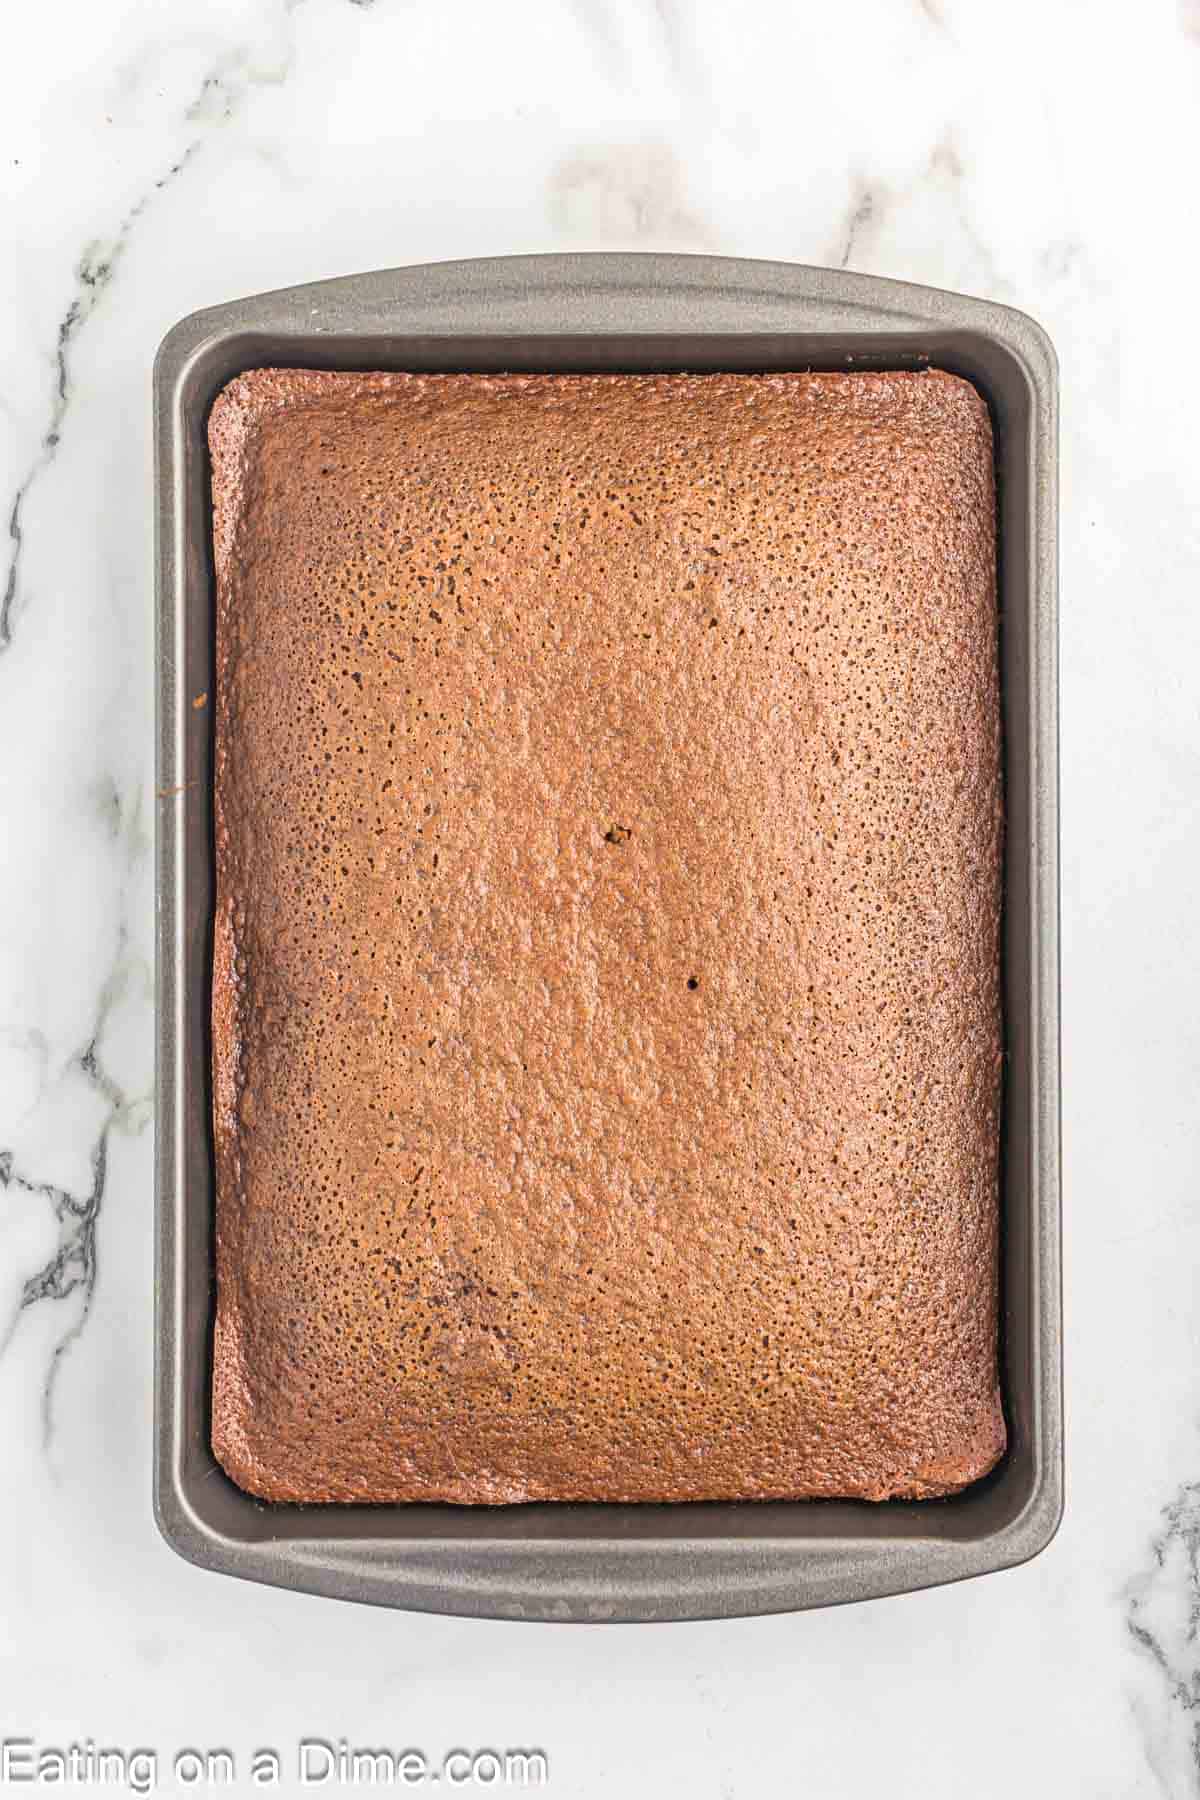 Baked cake in a cake pan